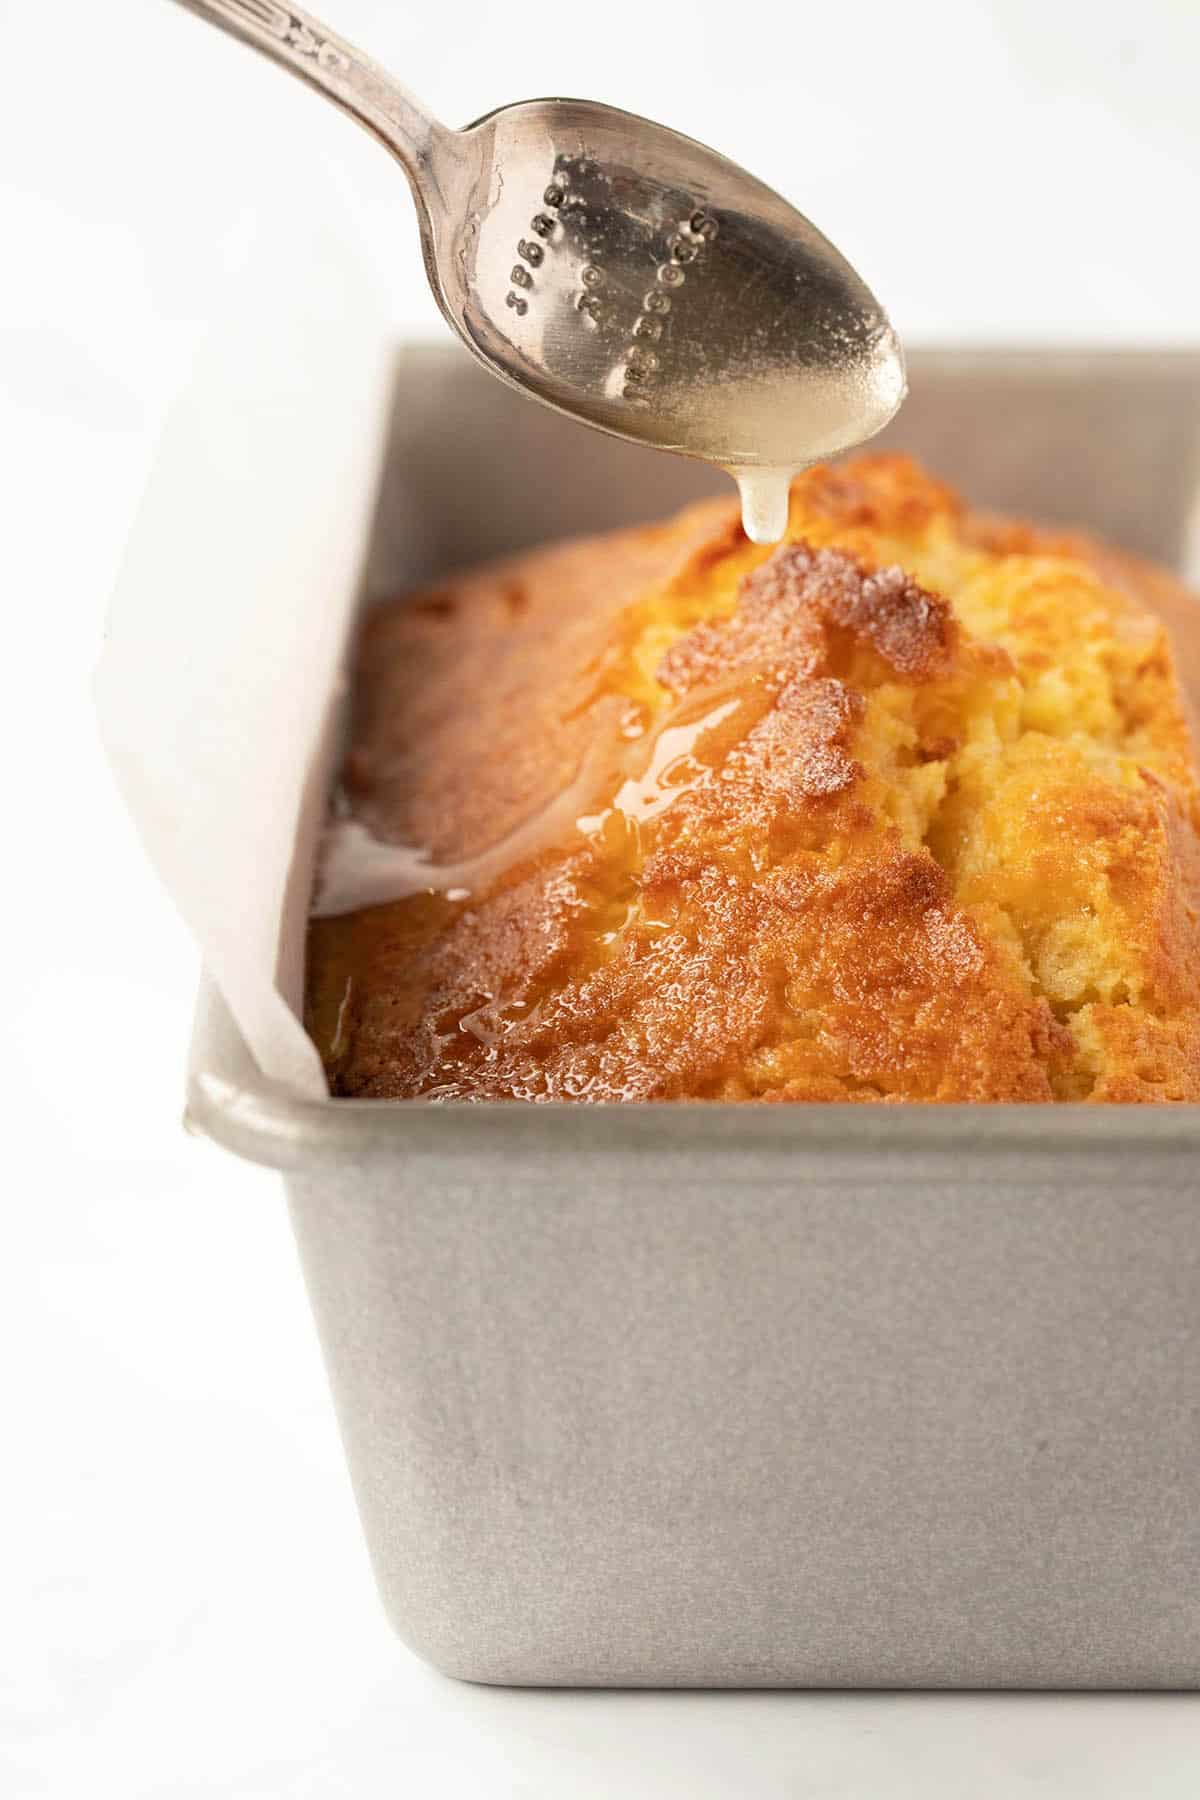 Close up a of a homemade Orange Pound Cake being drizzled with orange syrup.